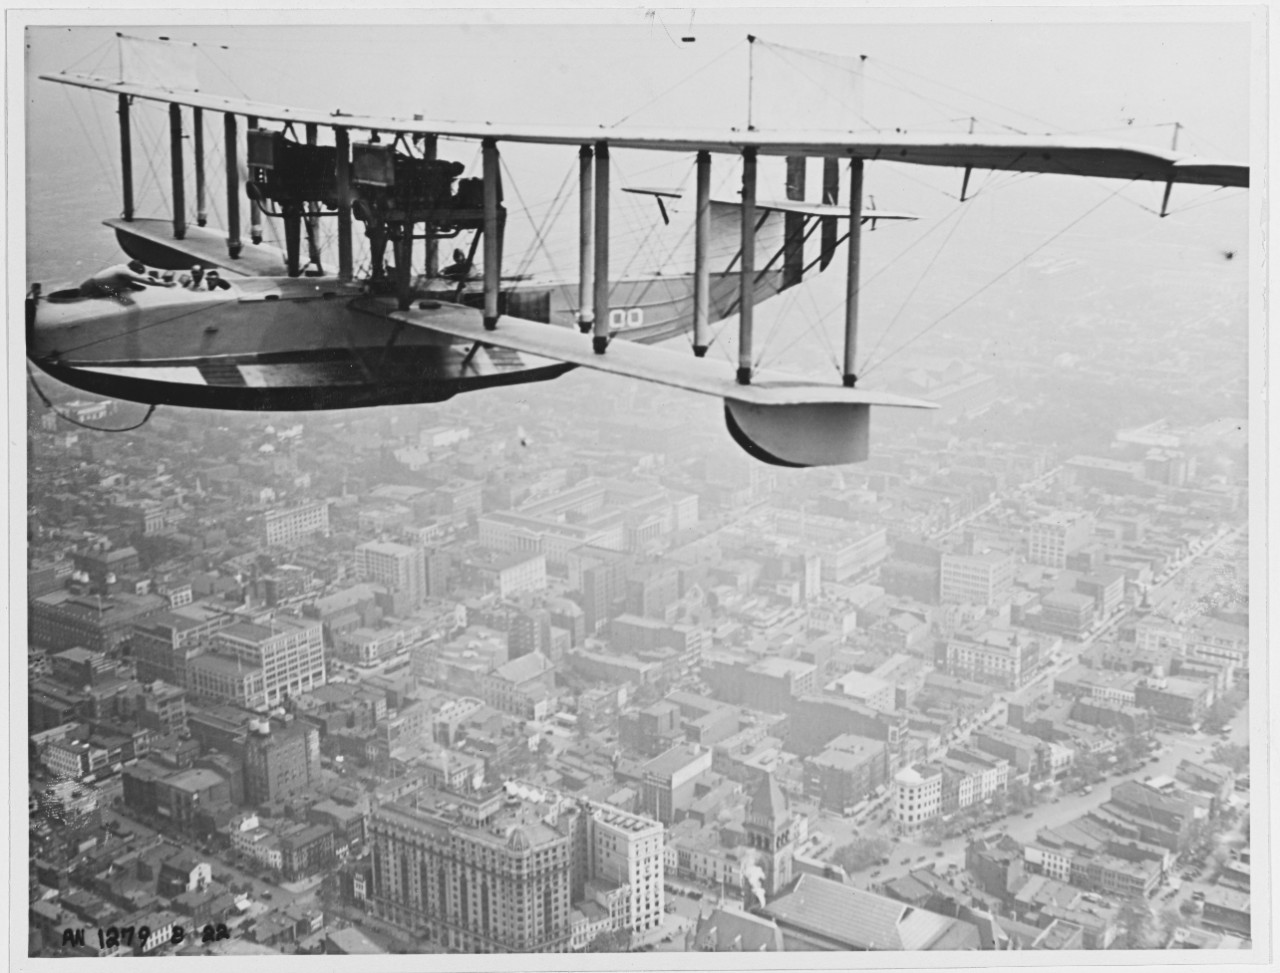 Carrier Pigeons being tossed from a Naval seaplane above Washington, D.C.